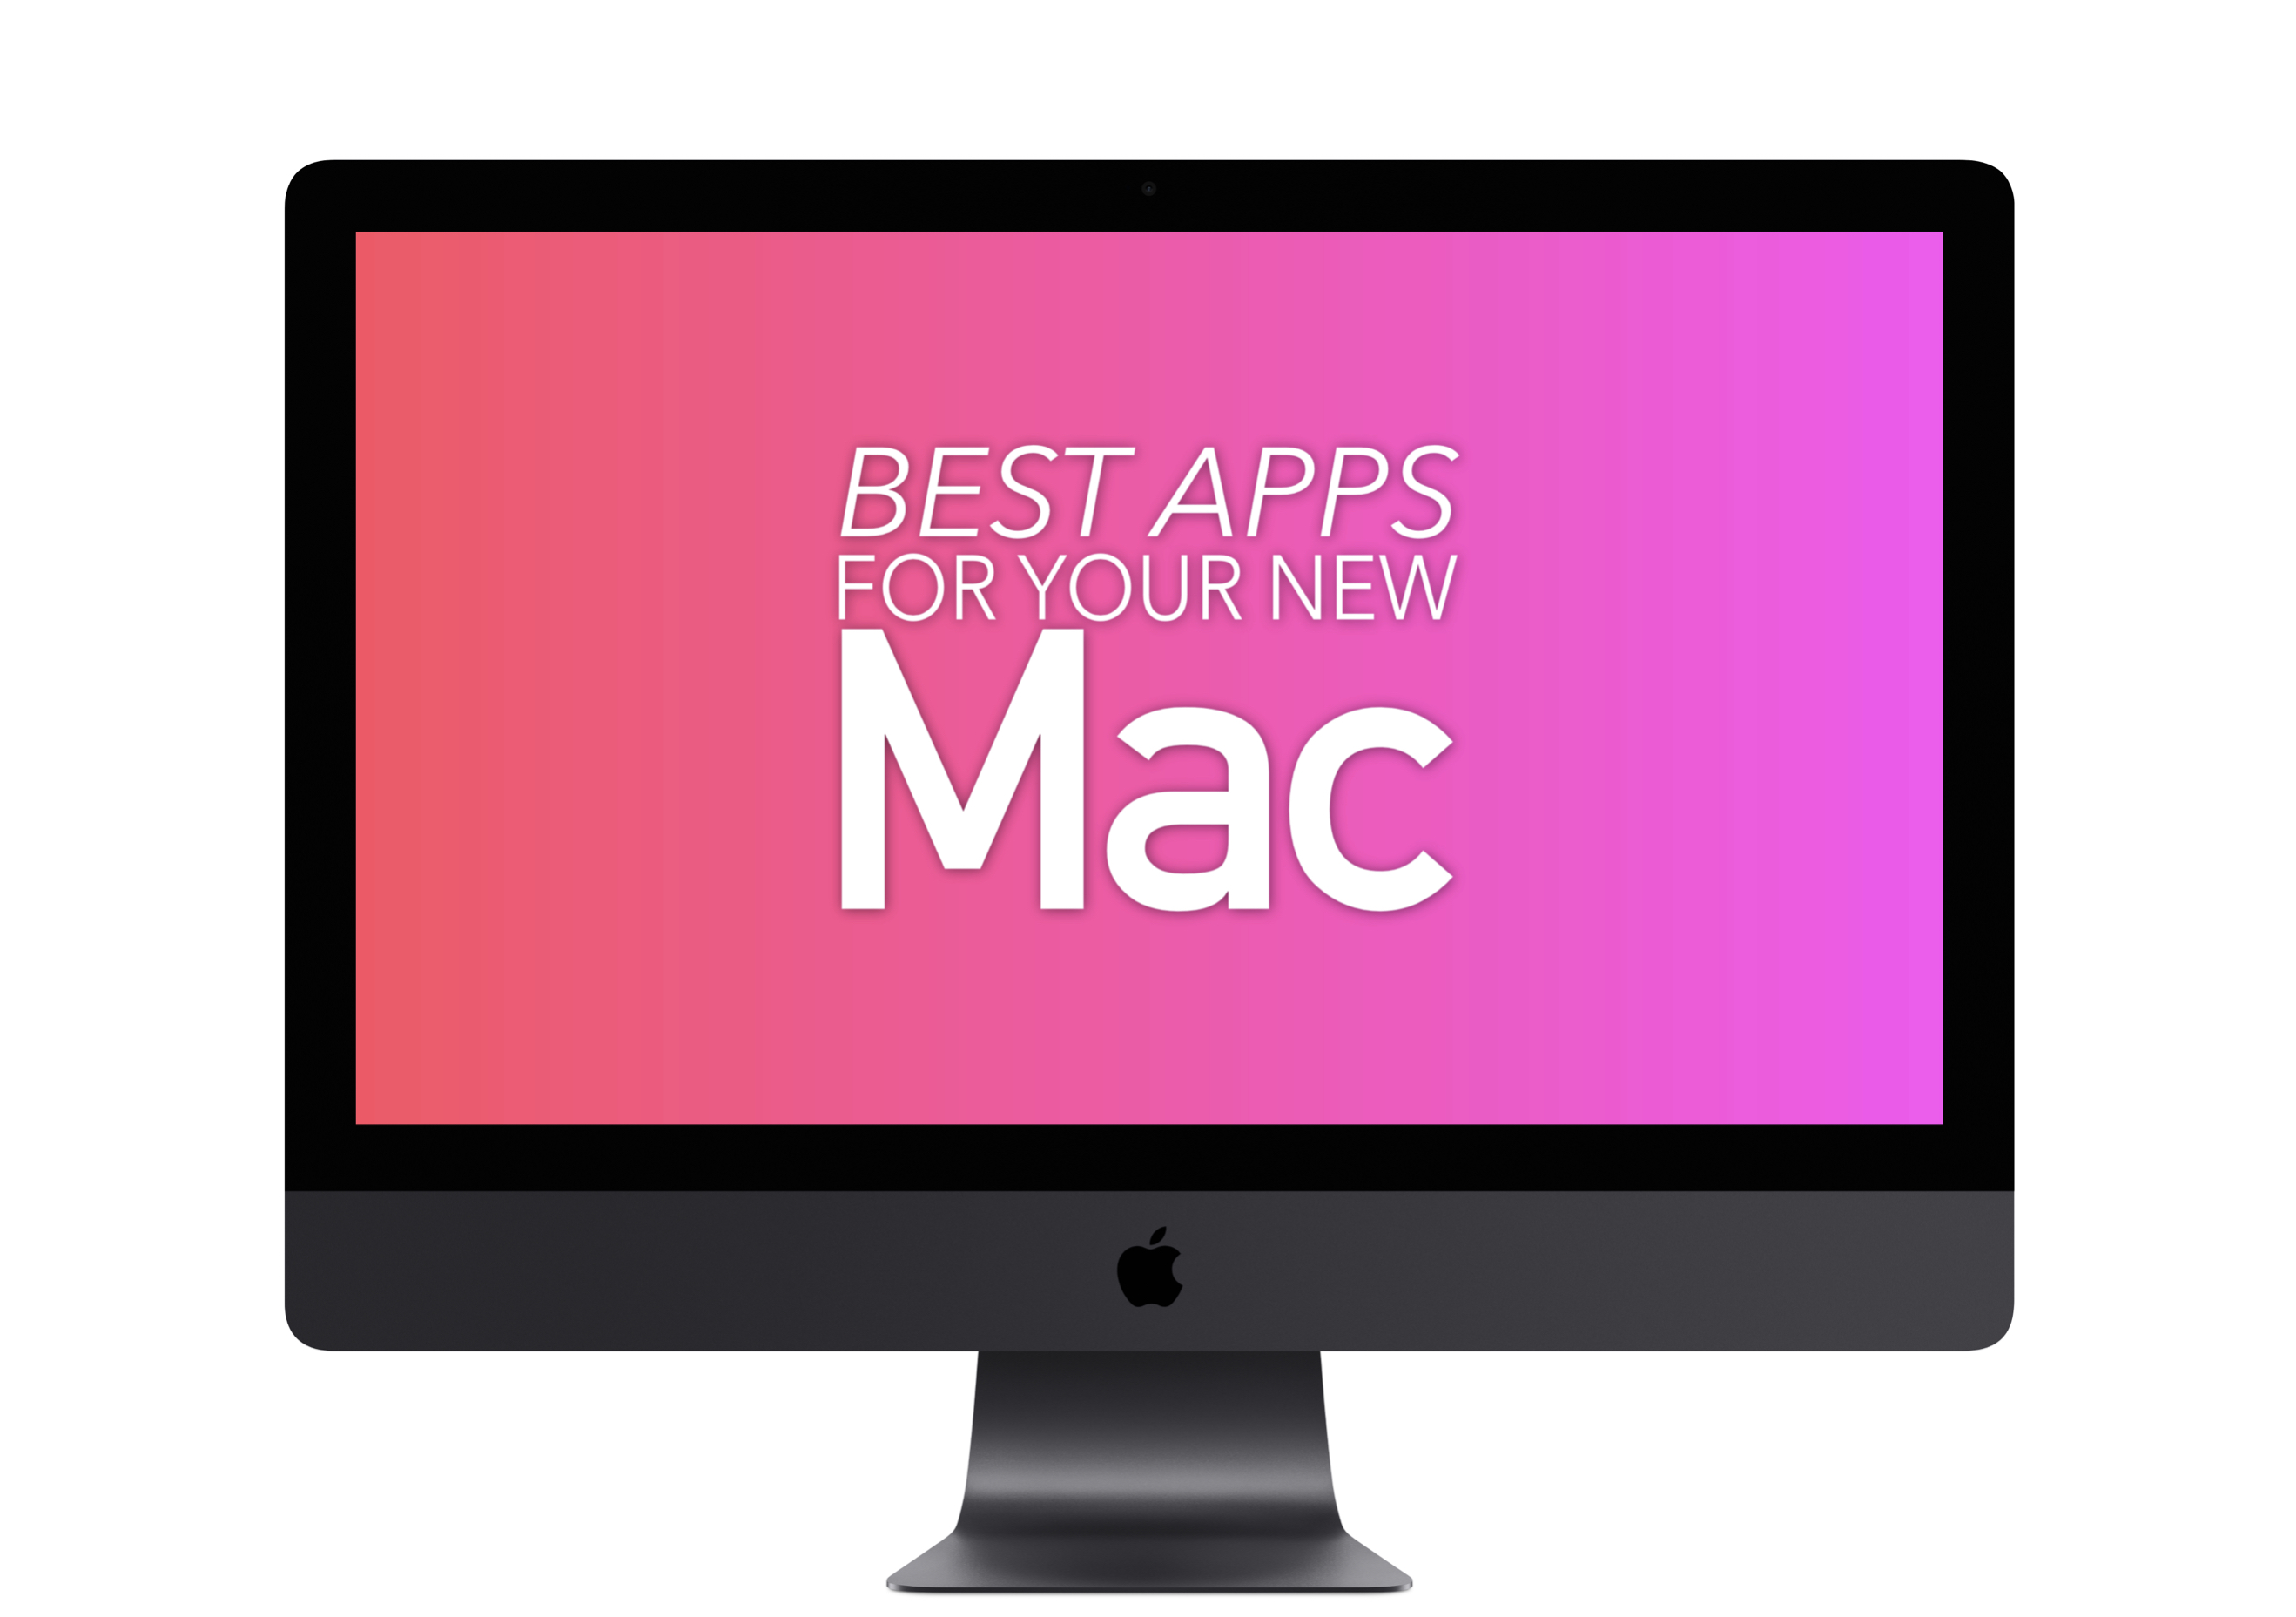 Best apps for your new Mac